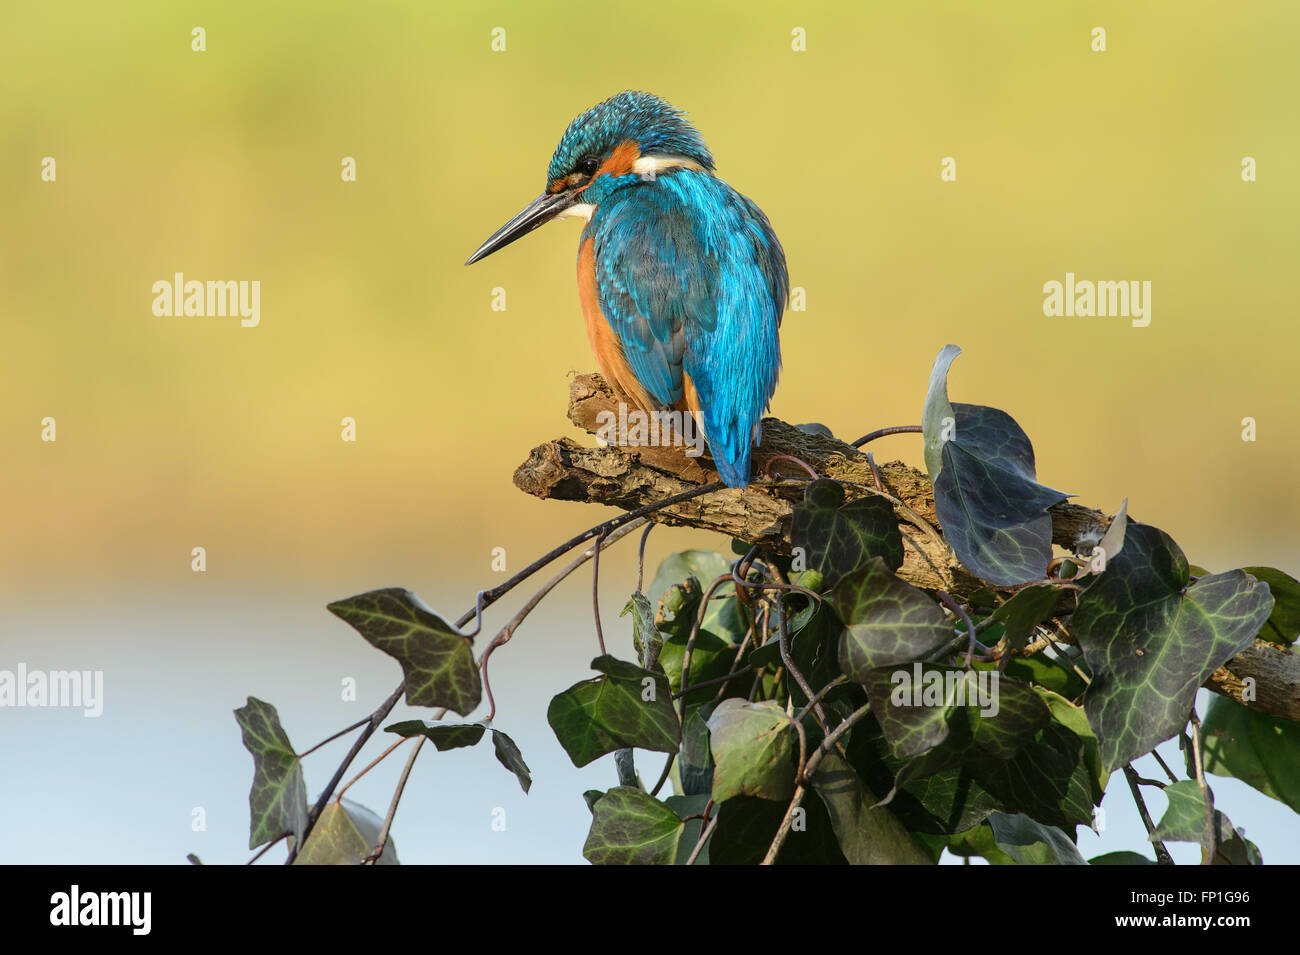 Male kingfisher on a branch with Ivy, looking down into the water for fish to catch Stock Photo